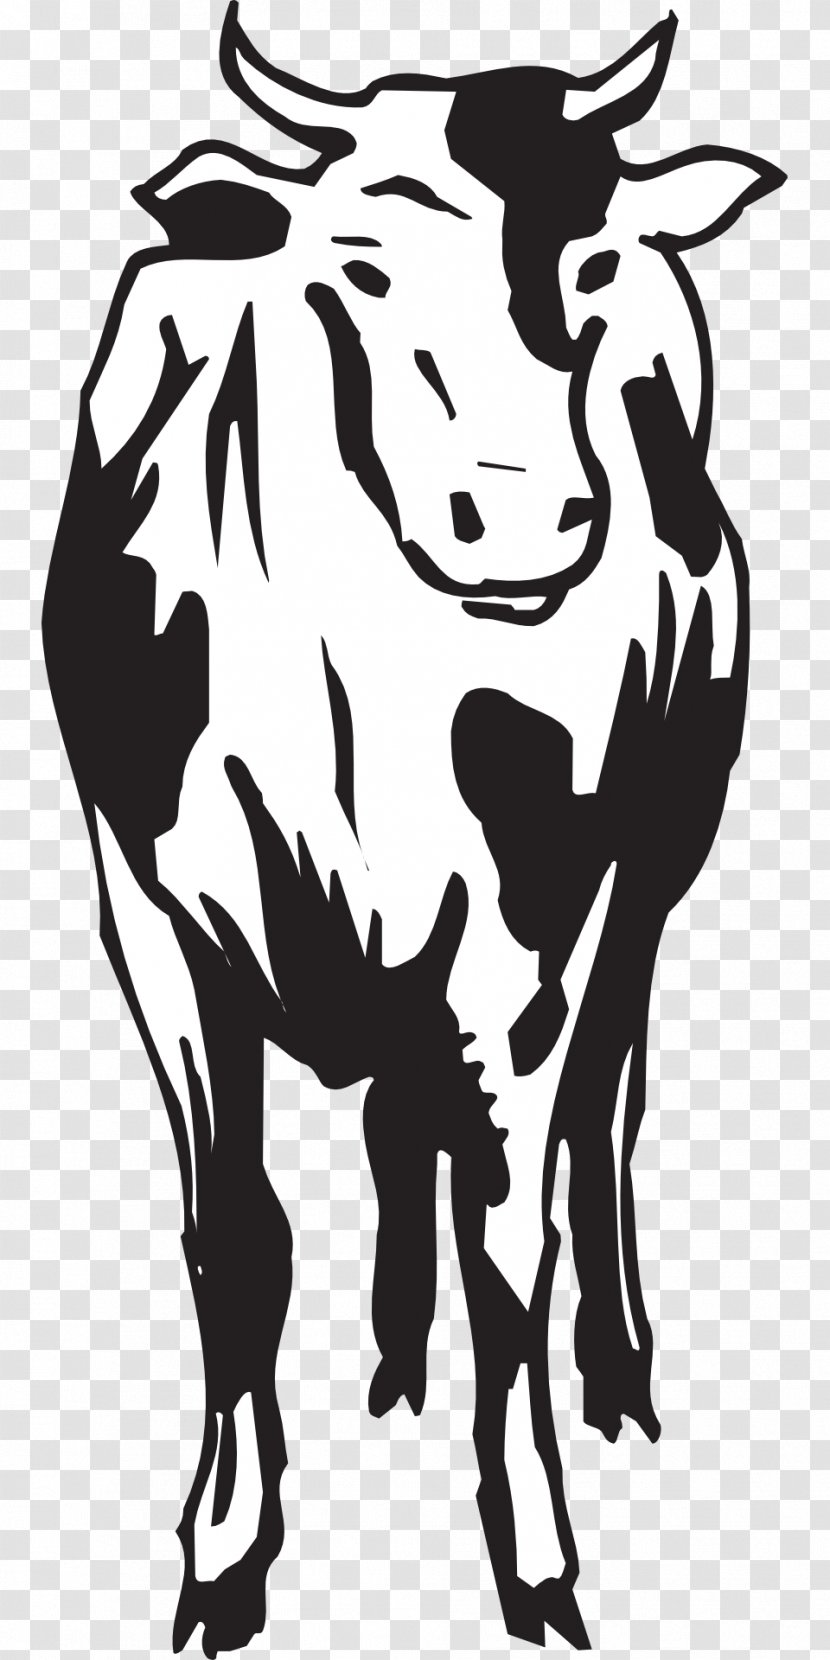 Charolais Cattle Holstein Friesian Angus Dairy Livestock - Cow Transparent PNG